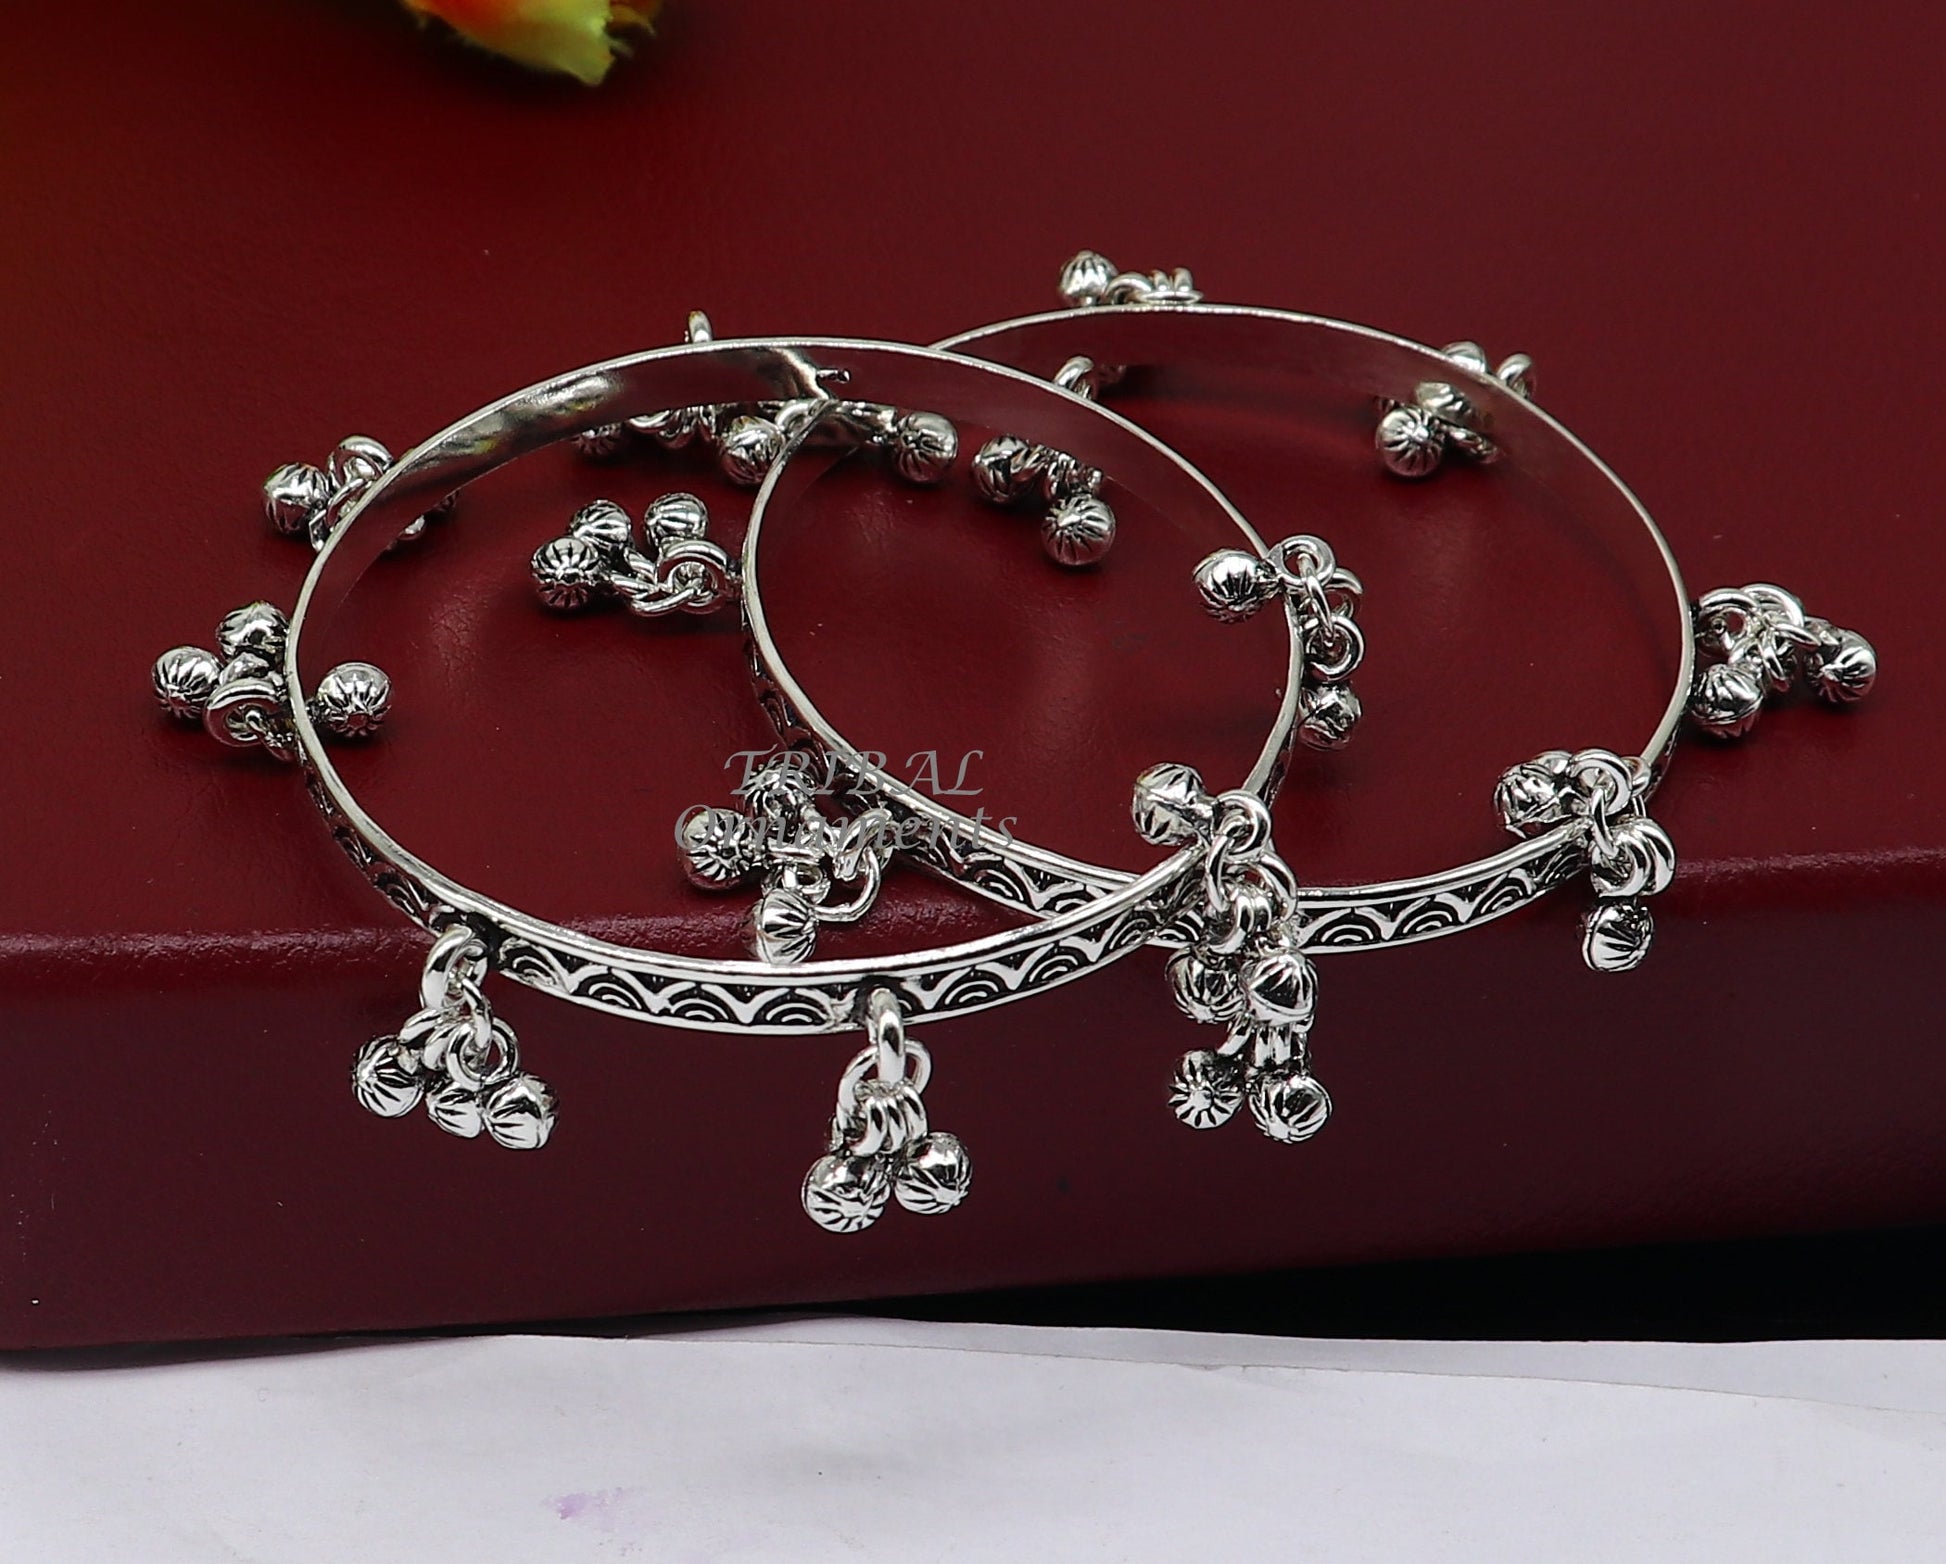 925 sterling silver handmade high quality bangles bracelet unique gorgeous jingling bells drops excellent charm brides gifting jewelry ba179 - TRIBAL ORNAMENTS